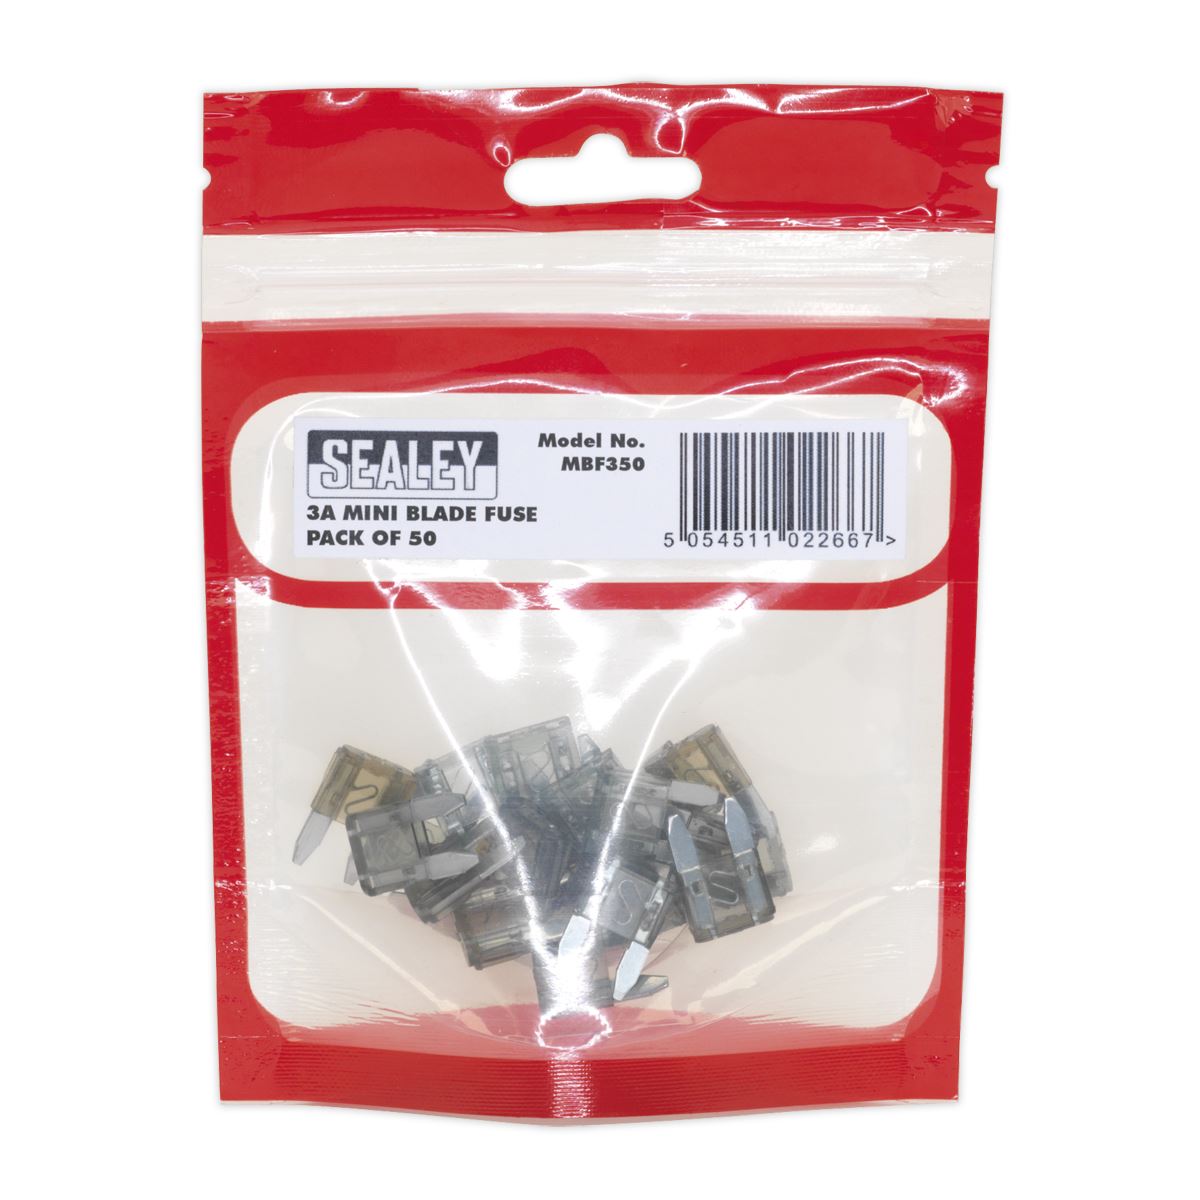 Sealey Automotive MINI Blade Fuse 3A Pack of 50